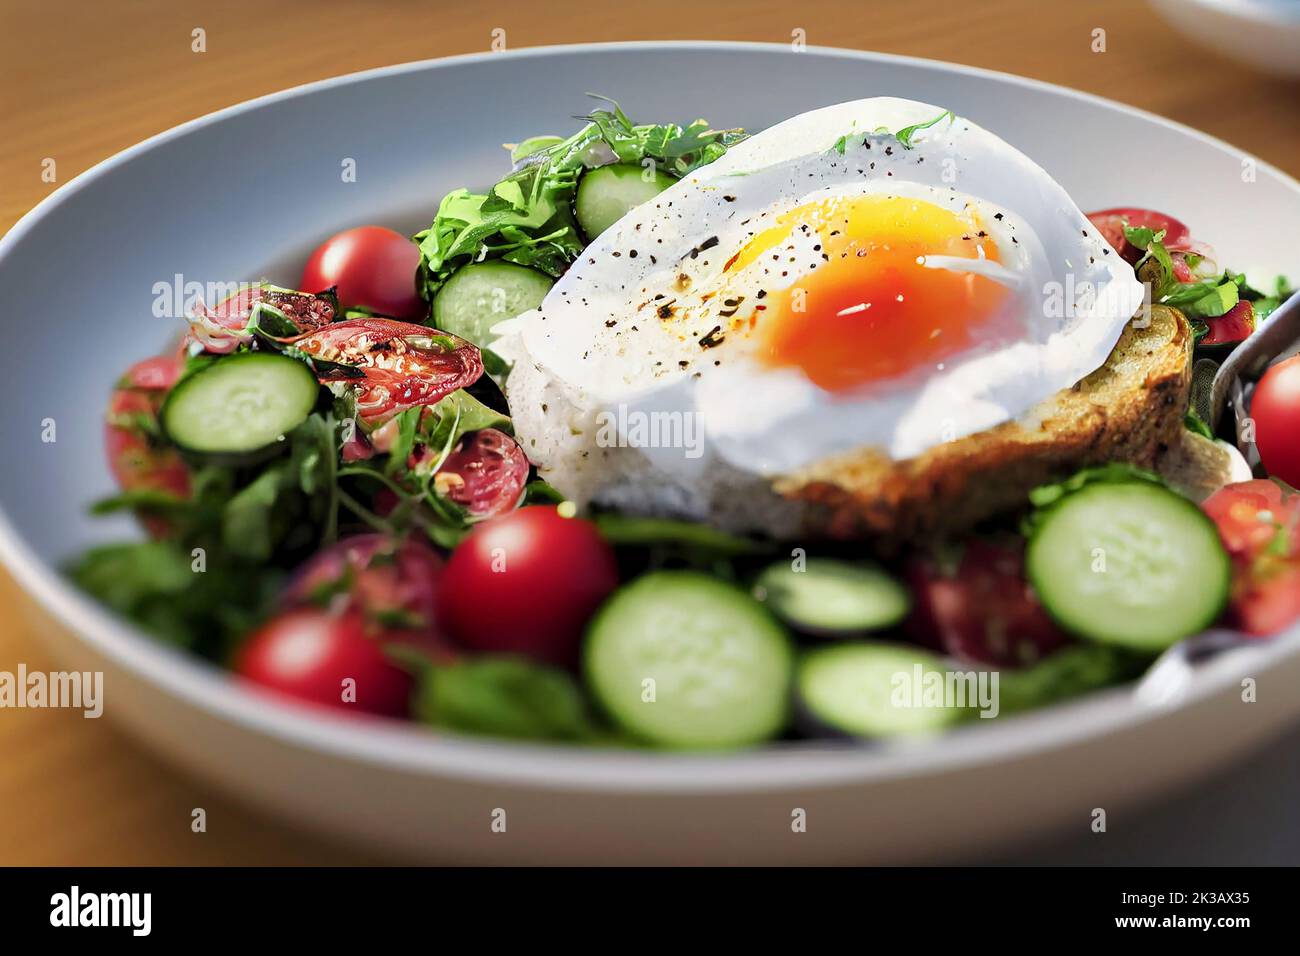 Fresh healthy light breakfast or lunch with poached egg, grains, fresh salad of cucumbers and cherry tomatoes, food photography and illustration Stock Photo